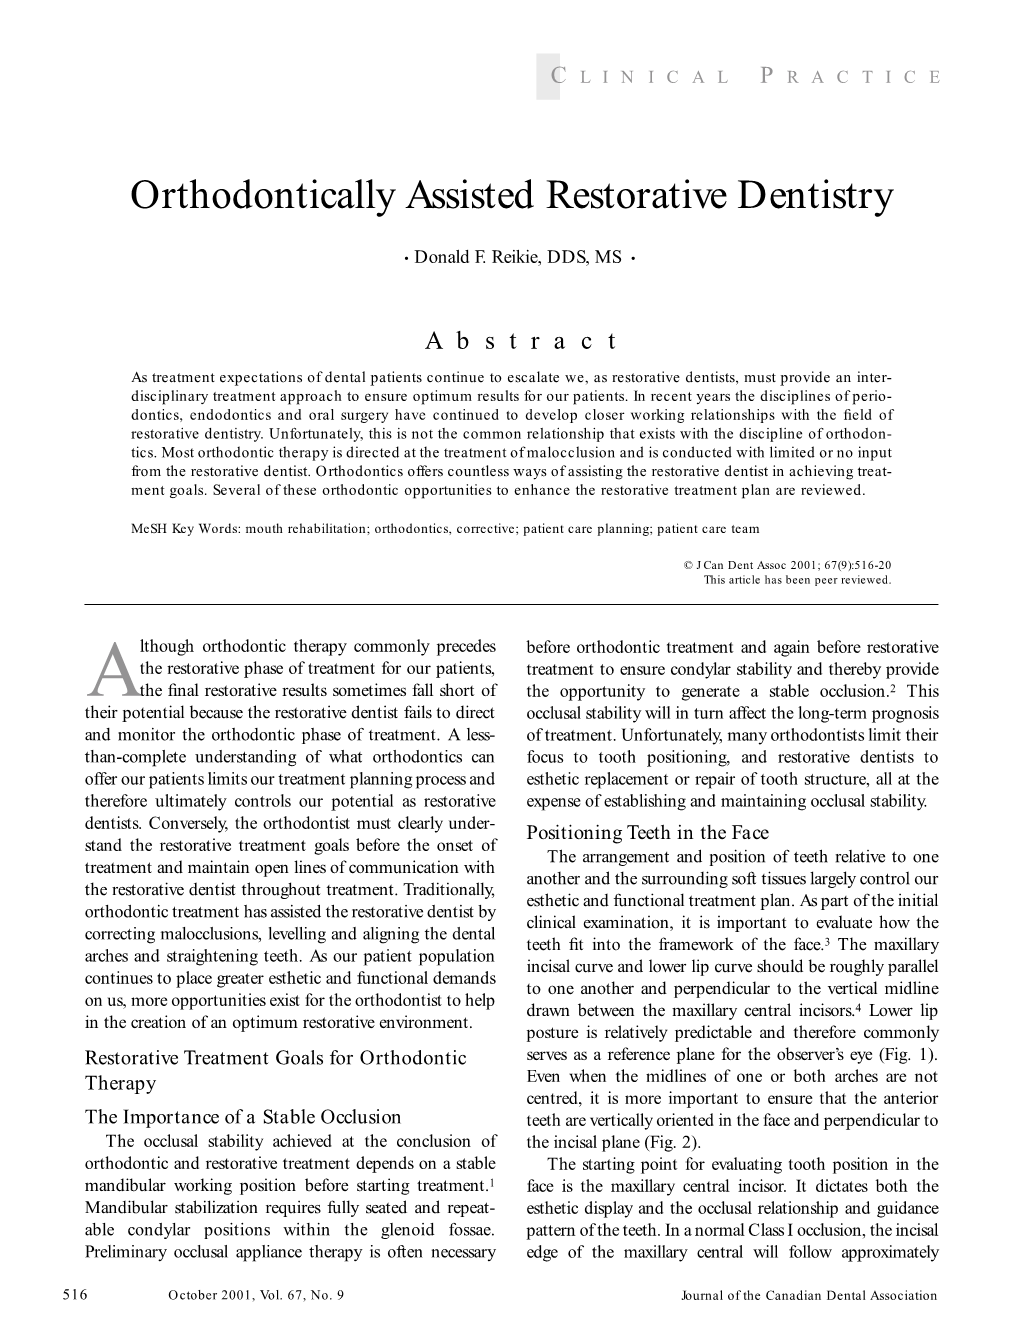 Orthodontically Assisted Restorative Dentistry